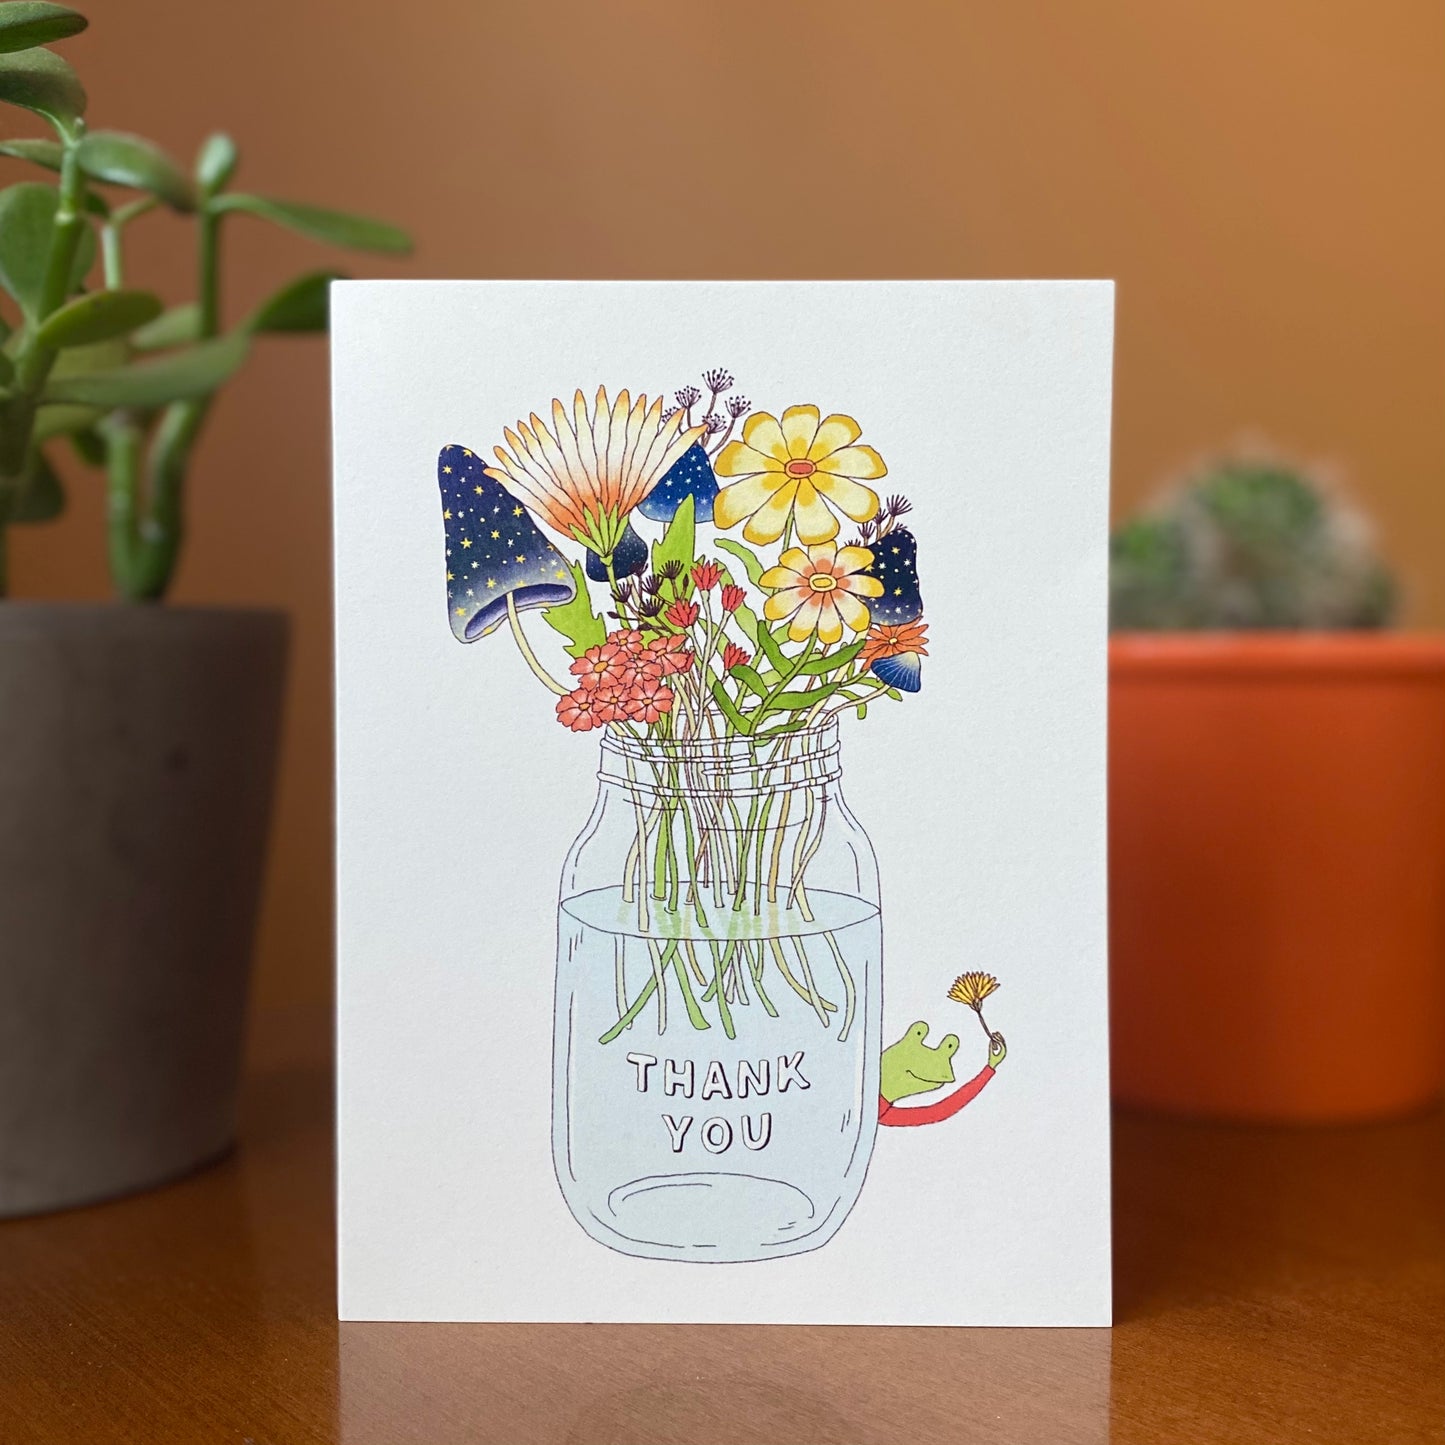 Thank you Card set with a cute frog and a mason jar full of plants and mushrooms